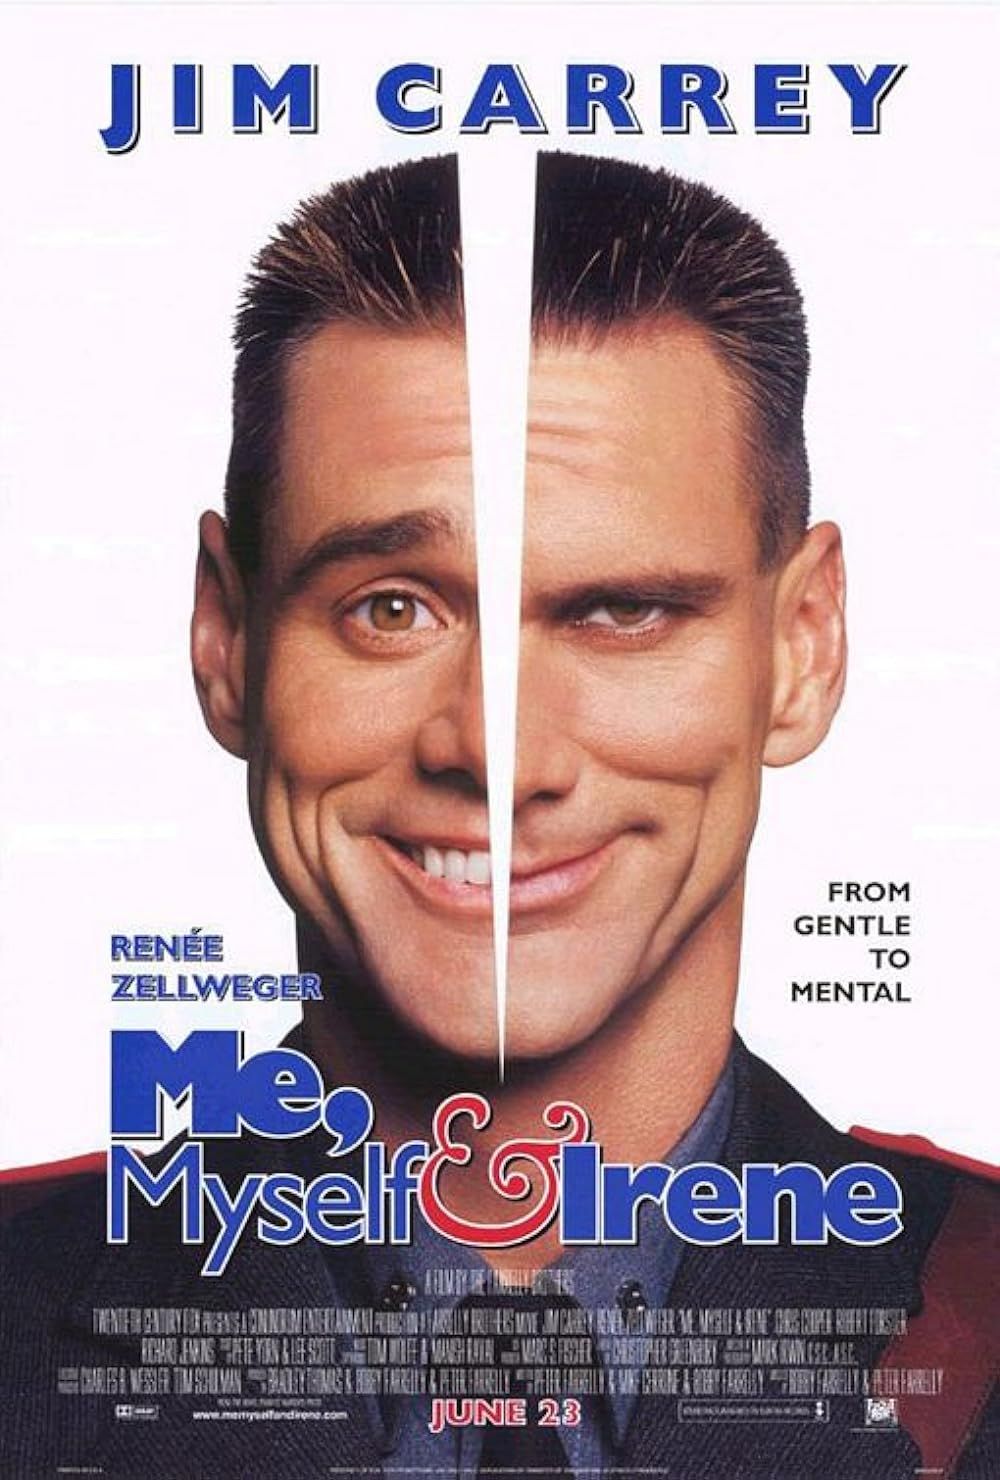 A Split Image of Jim Carrey's face on Me, Myself and Irene Poster